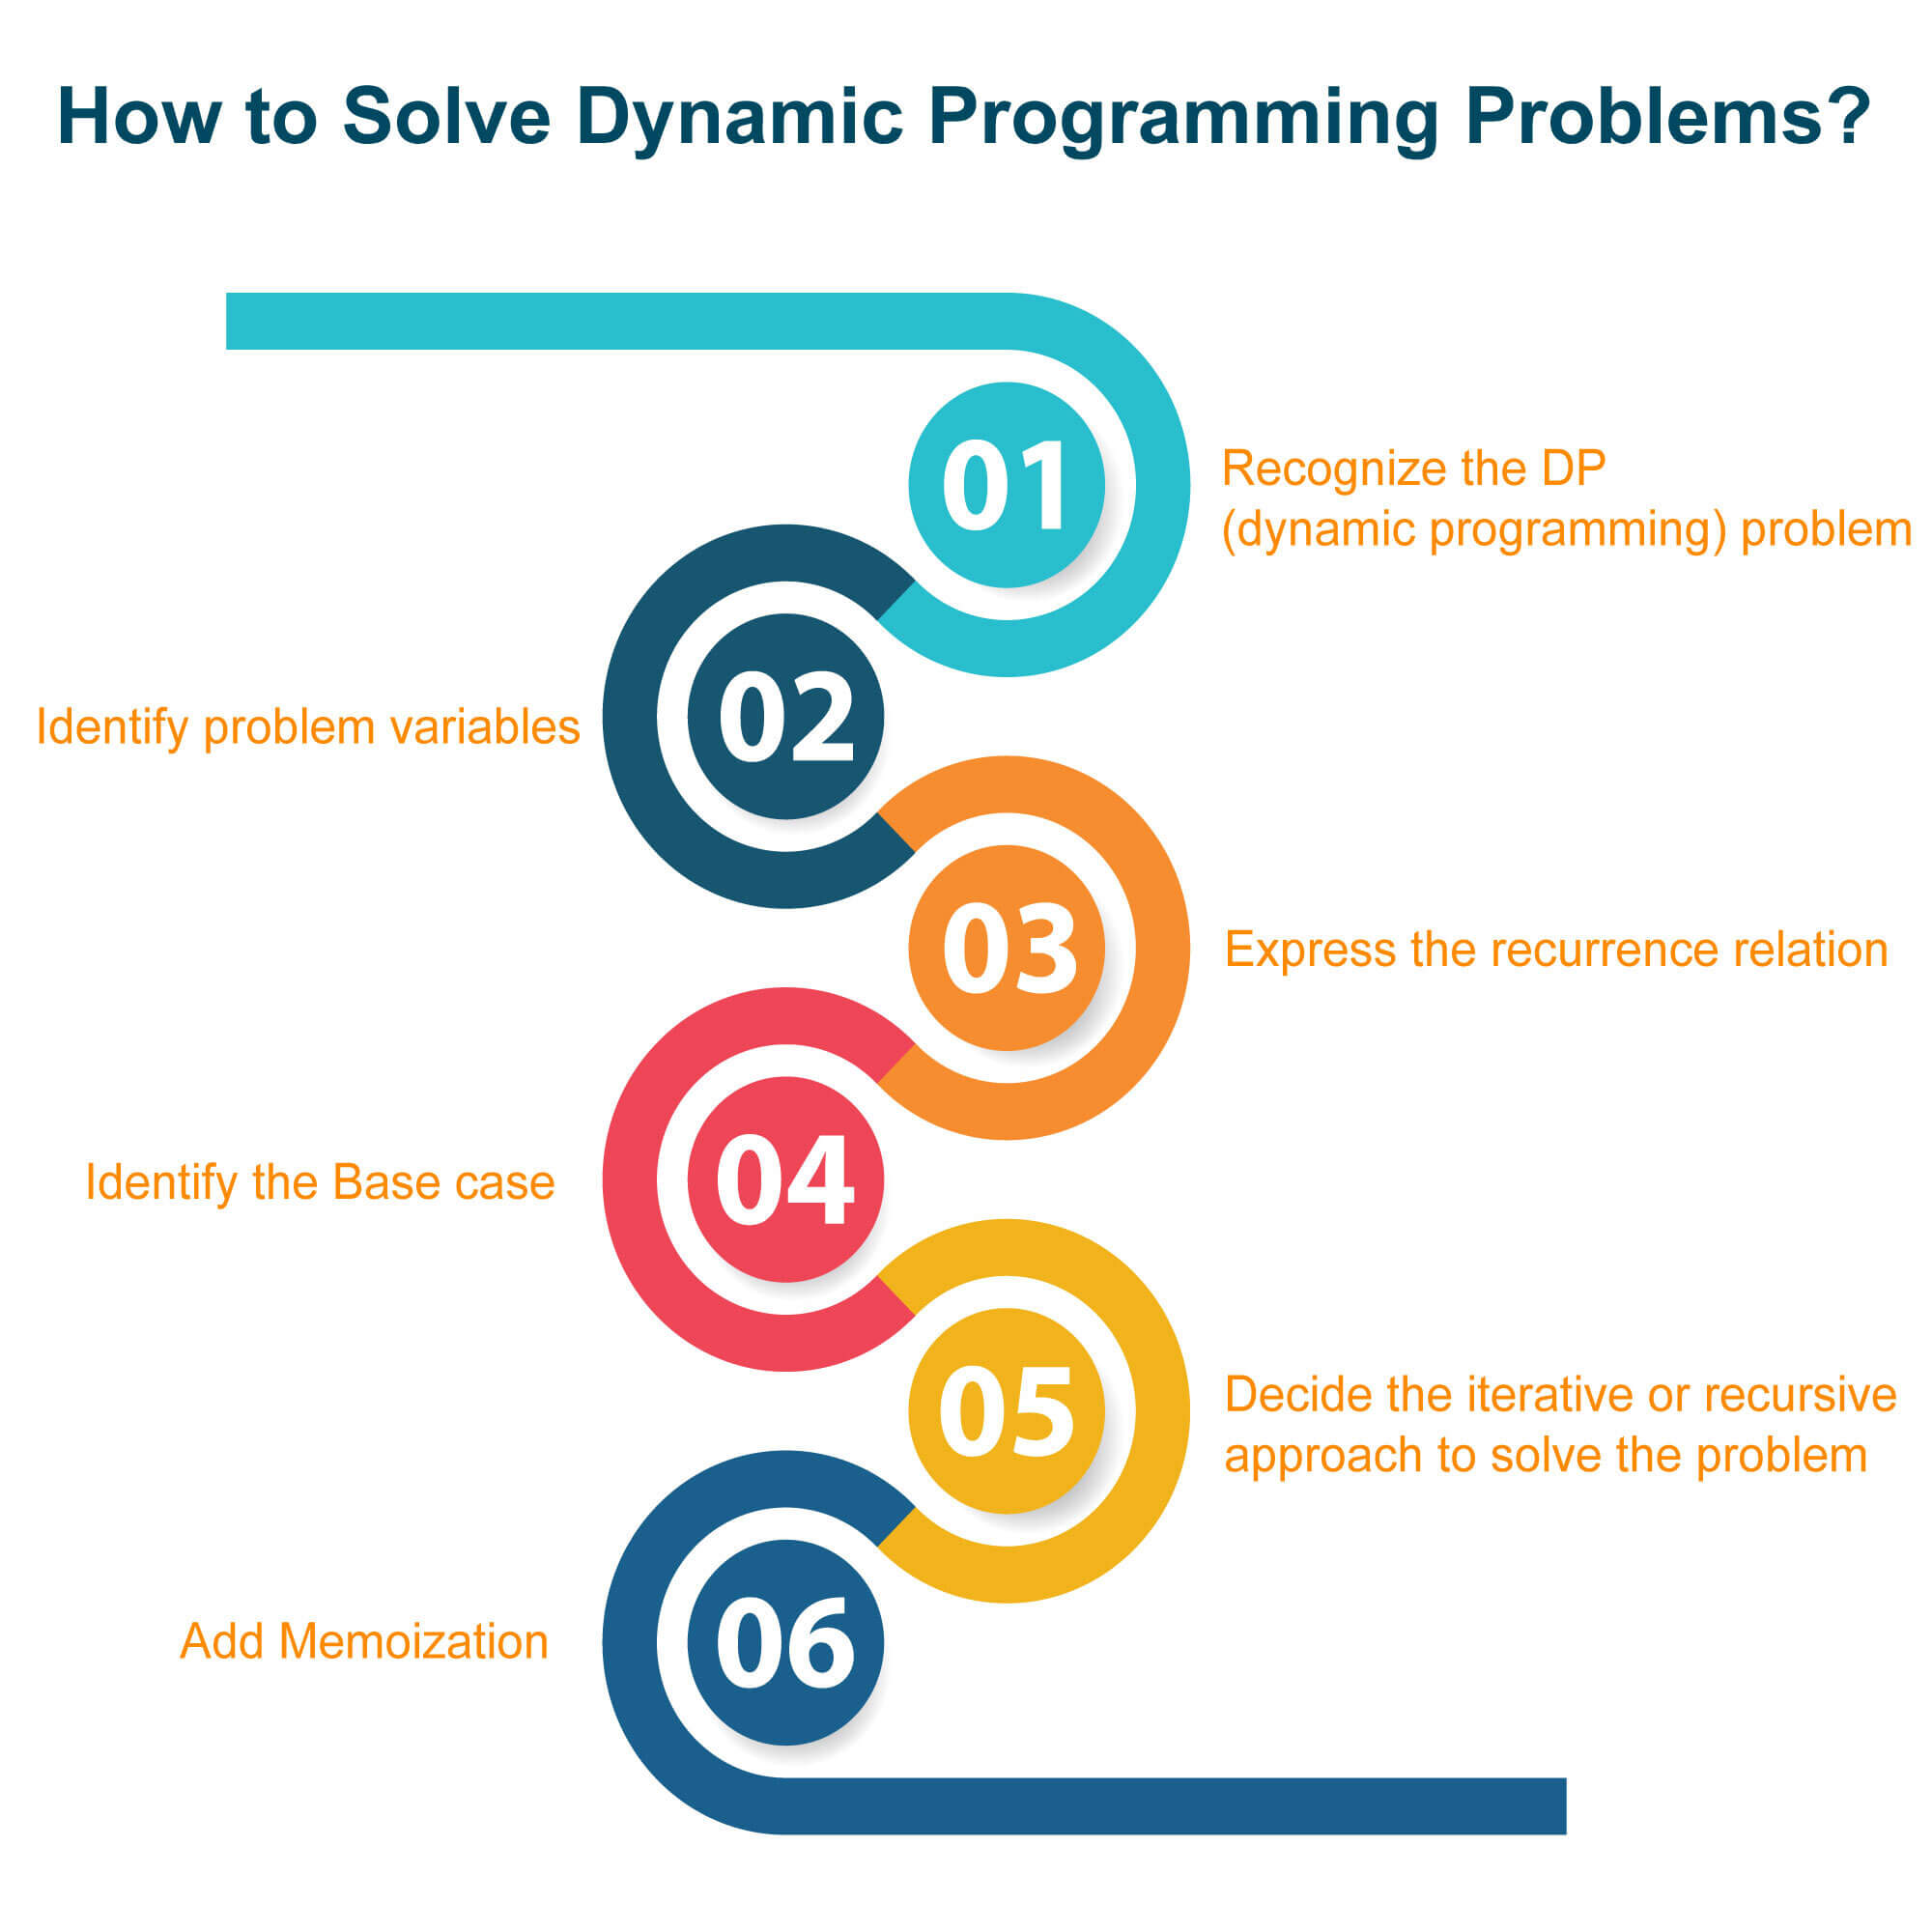 6 Steps showing how to solve dynamic programming problems